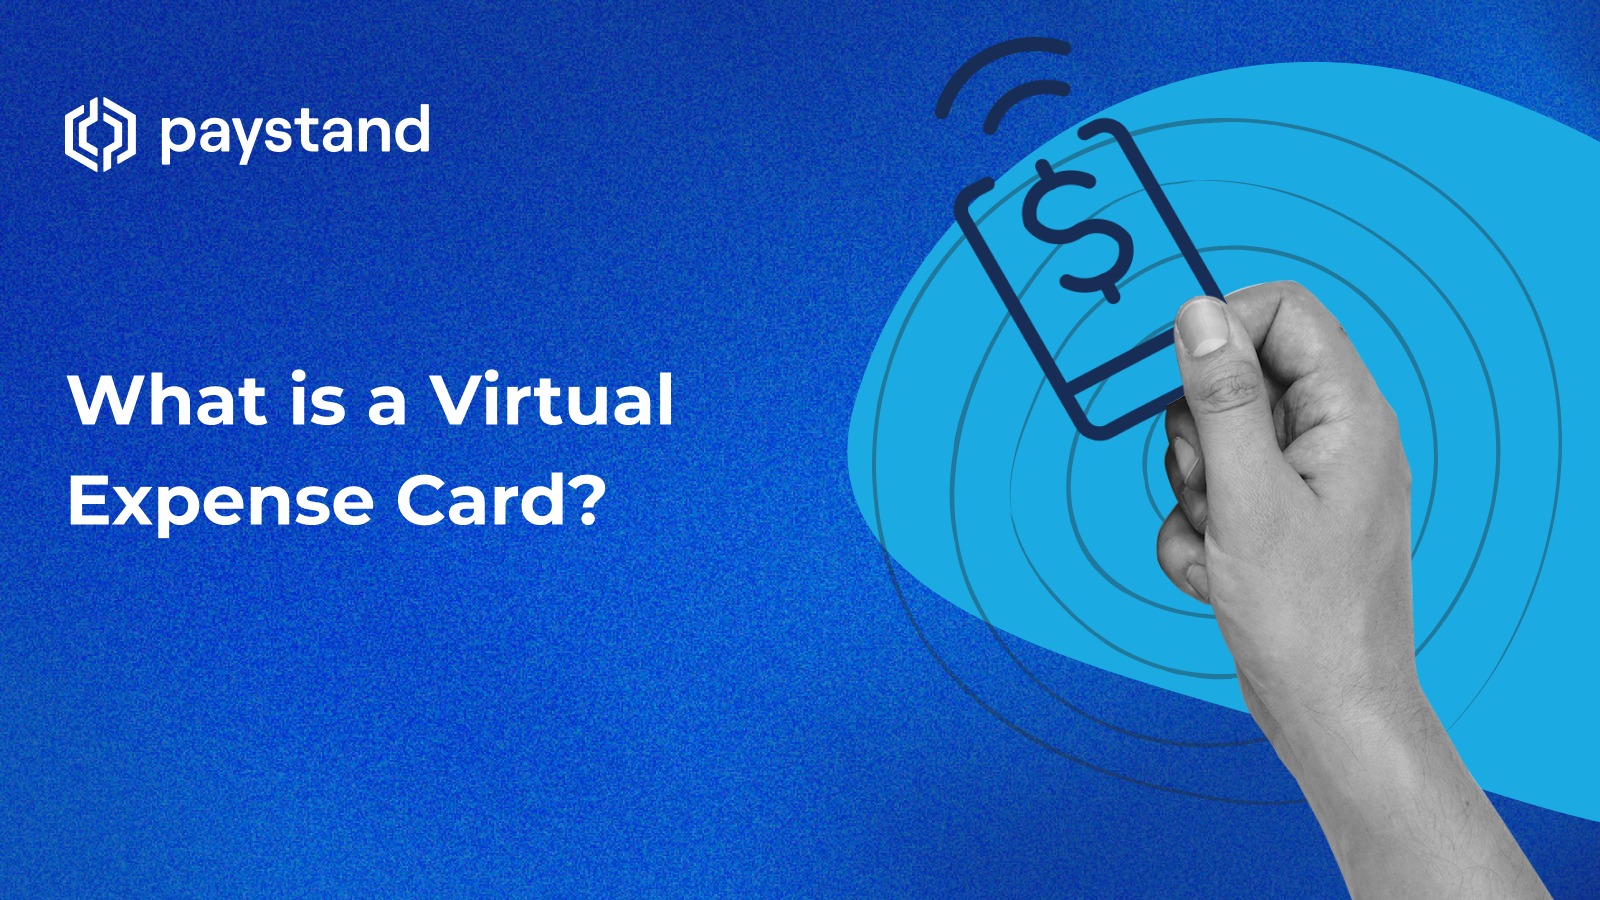 What is a Virtual Expense Card?